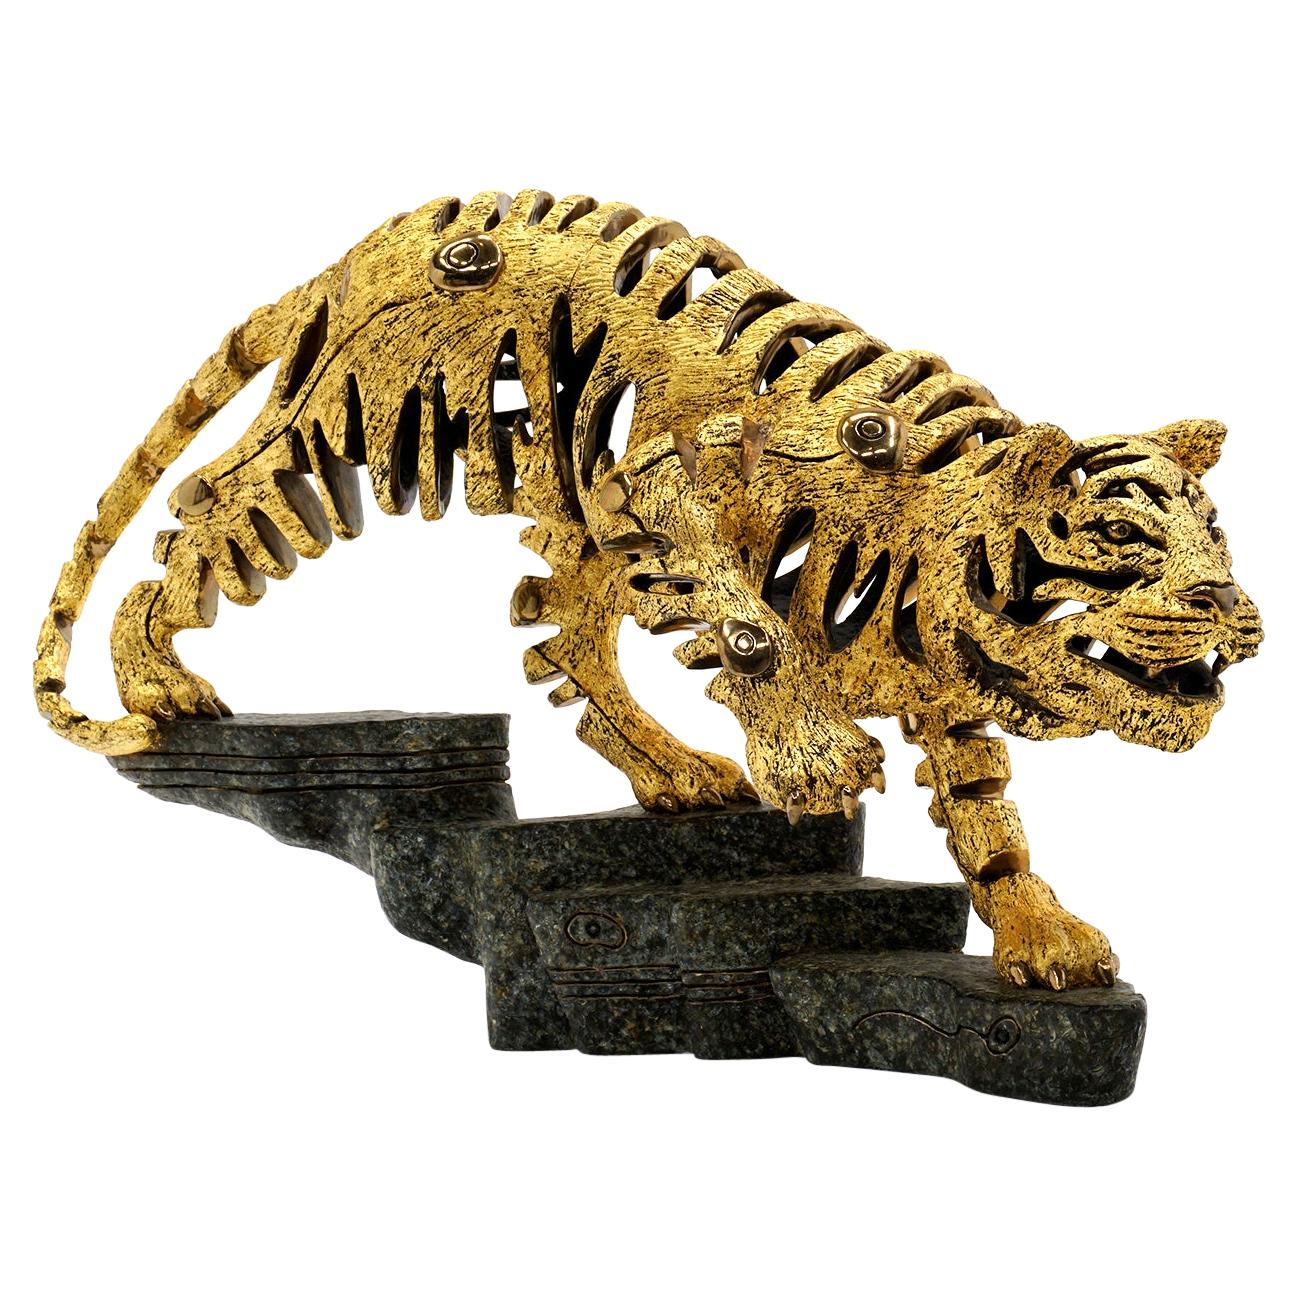 "Golden Tiger" Scuipture by Jiang Tiefeng, 1993, Bronze w/ 23-Carat Gold Leaf